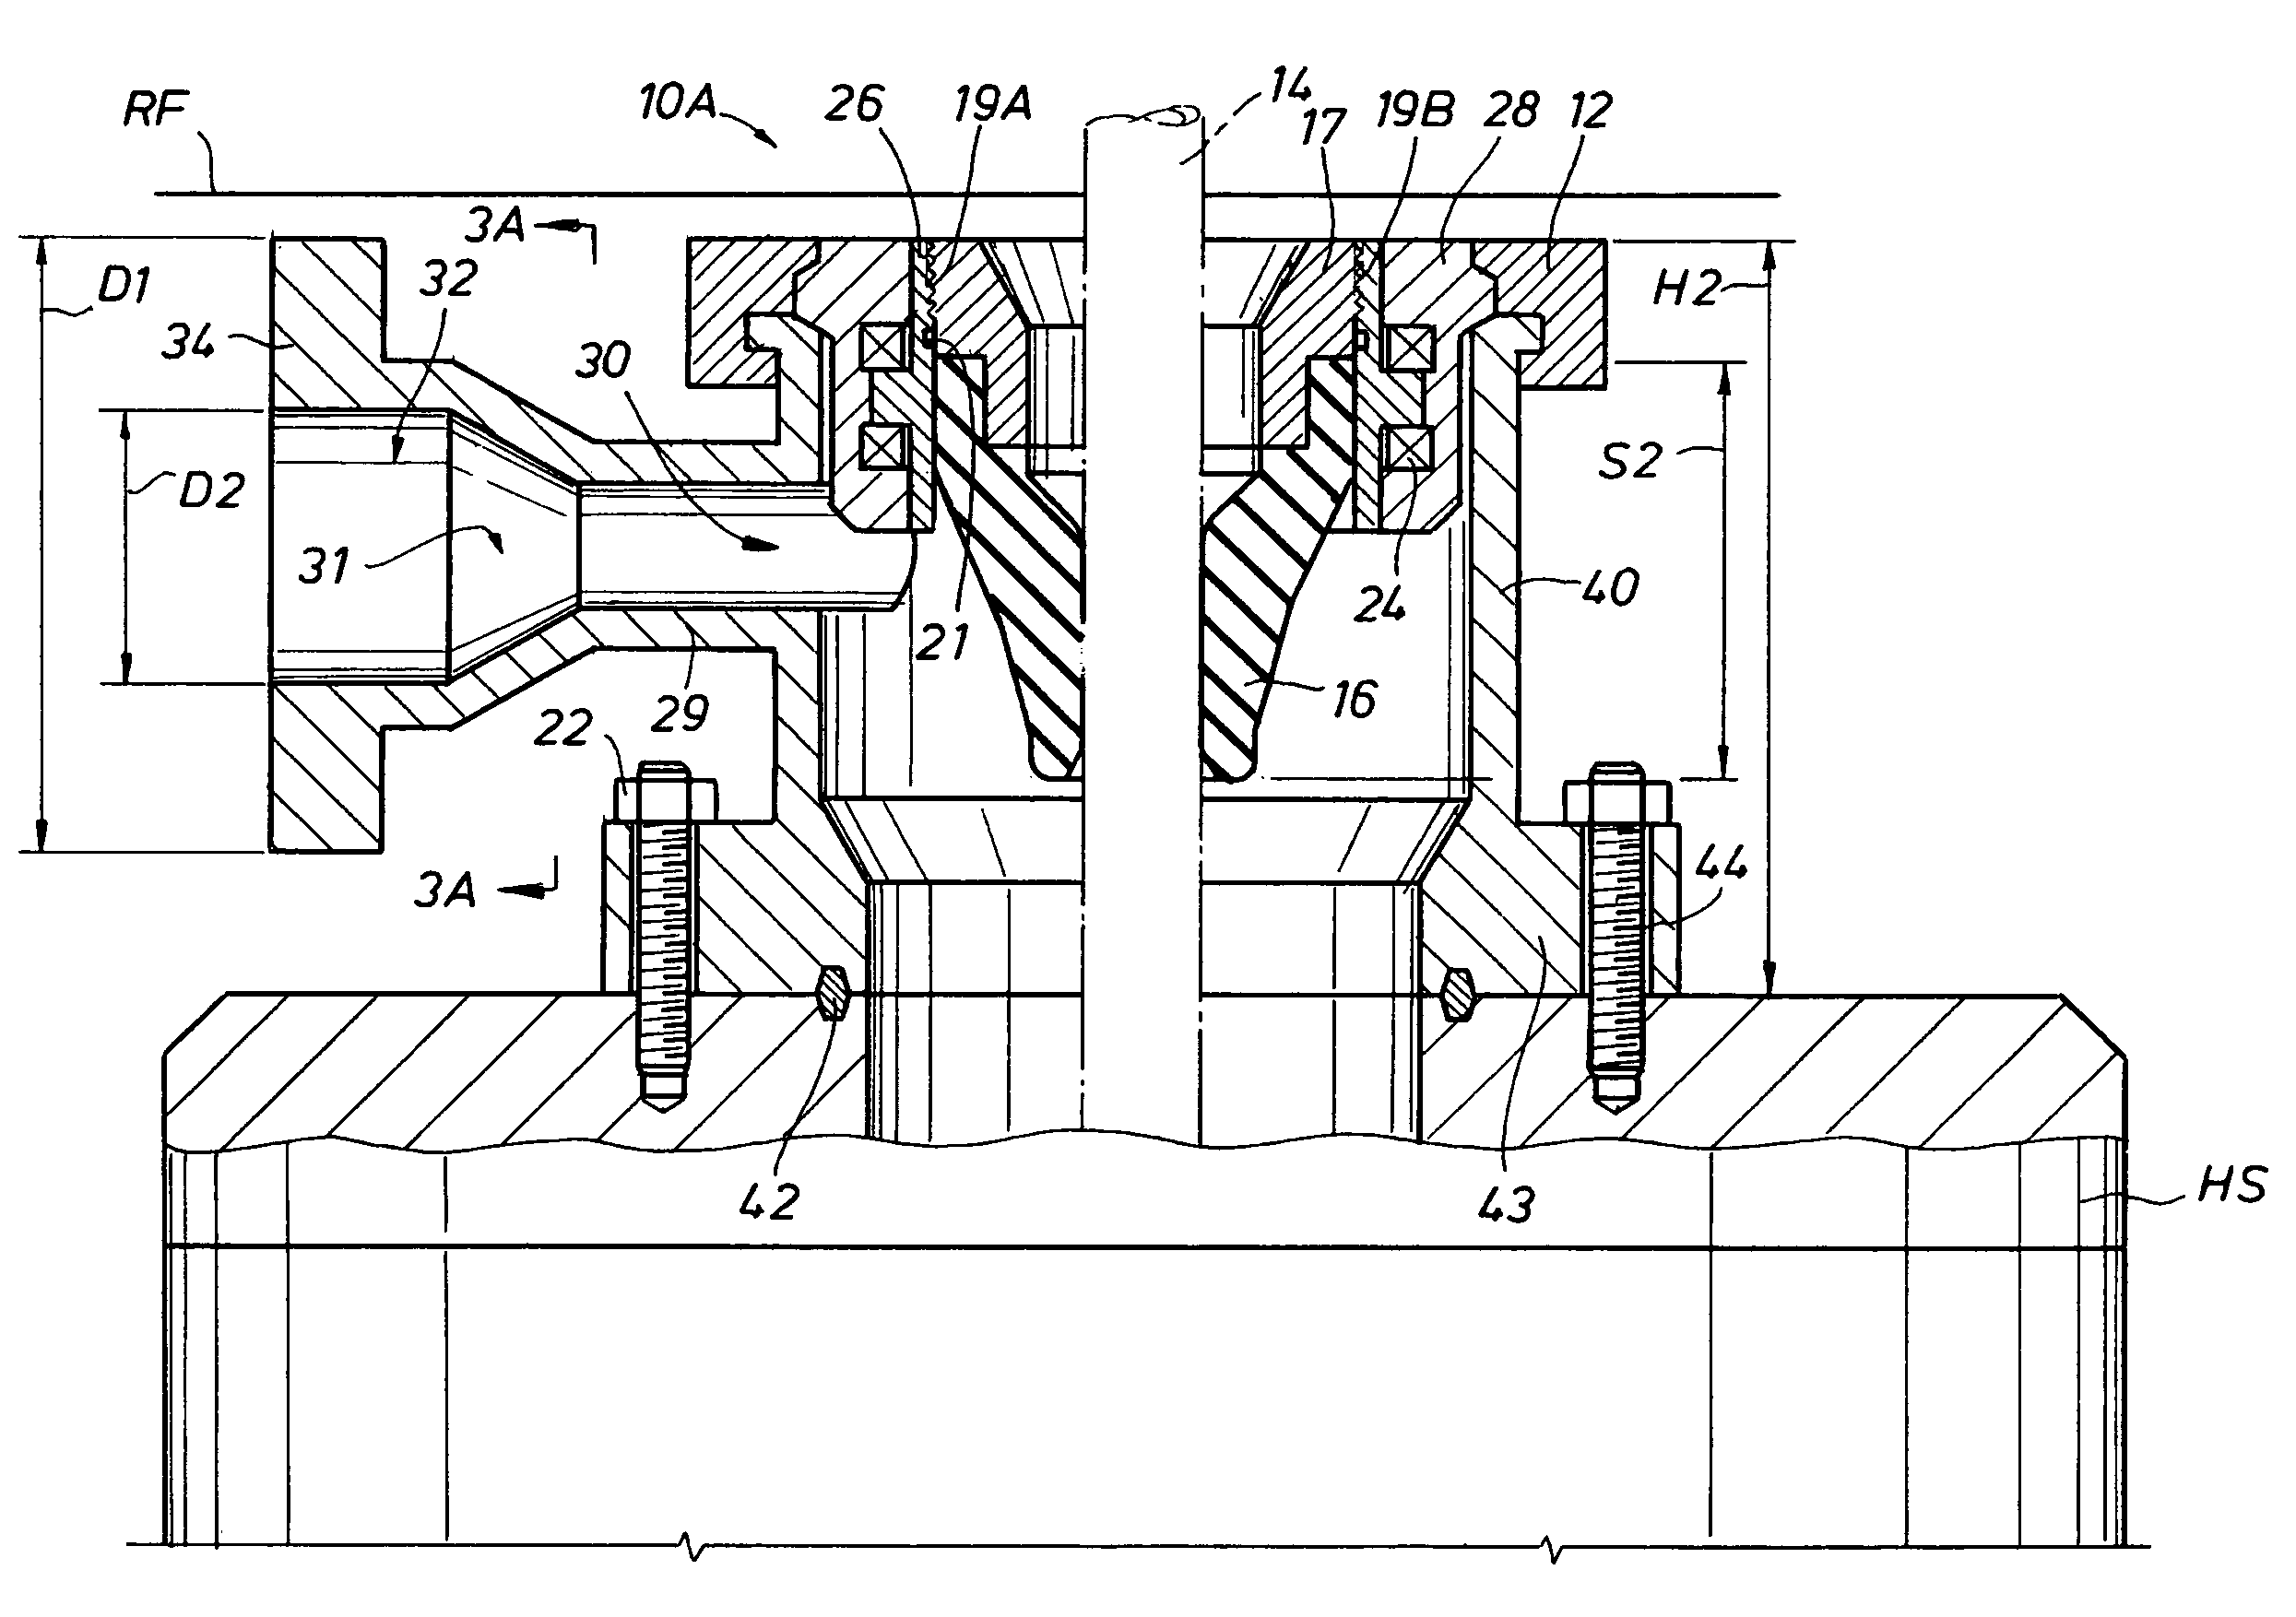 Low profile rotating control device